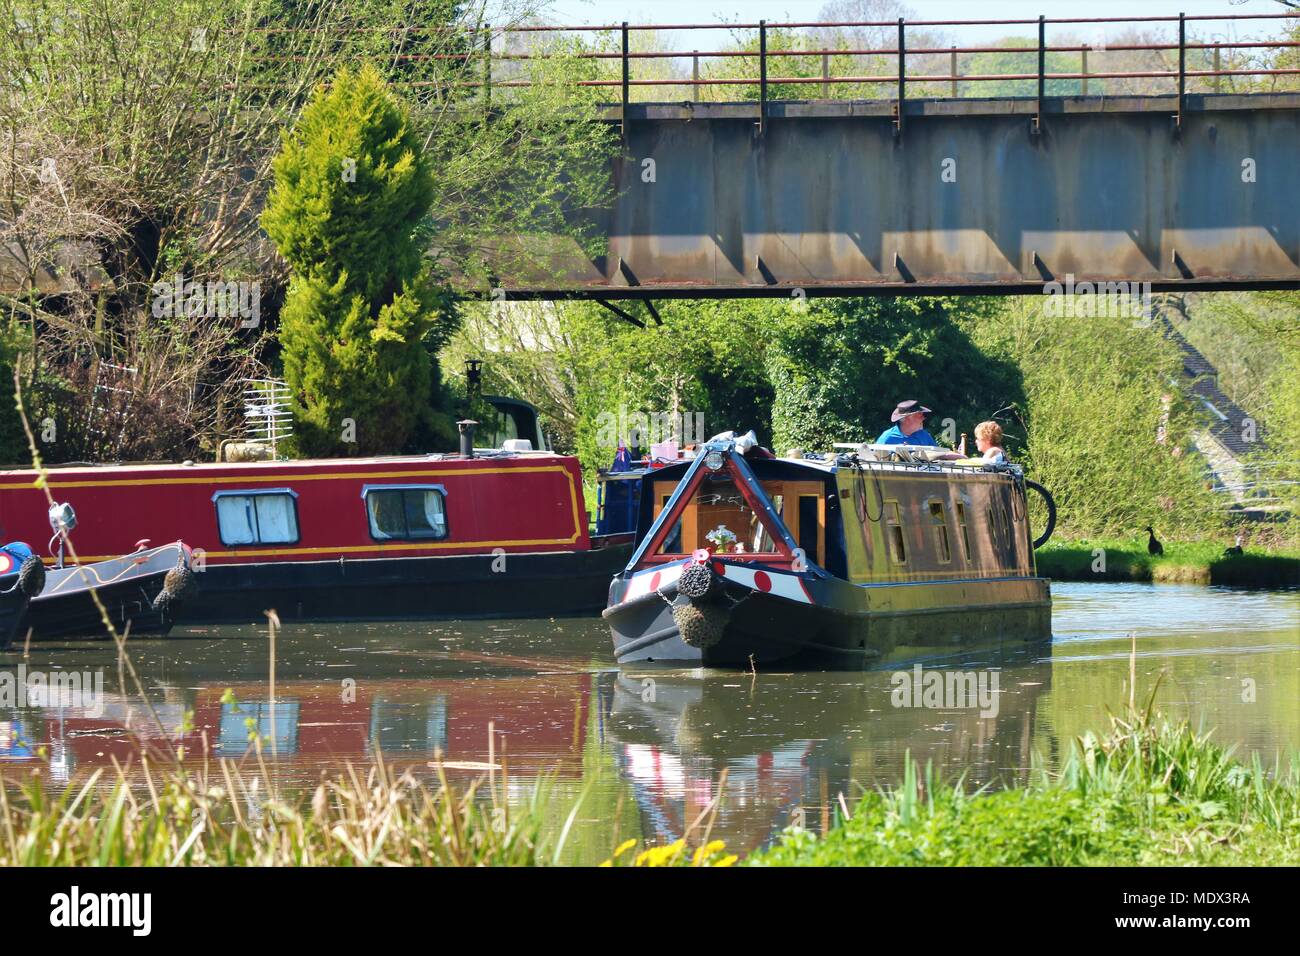 Canal boats / barges at stretch of canal at Enslow Wharf, Bletchingdon, Oxfordshire, UK on a sunny day in Spring Stock Photo